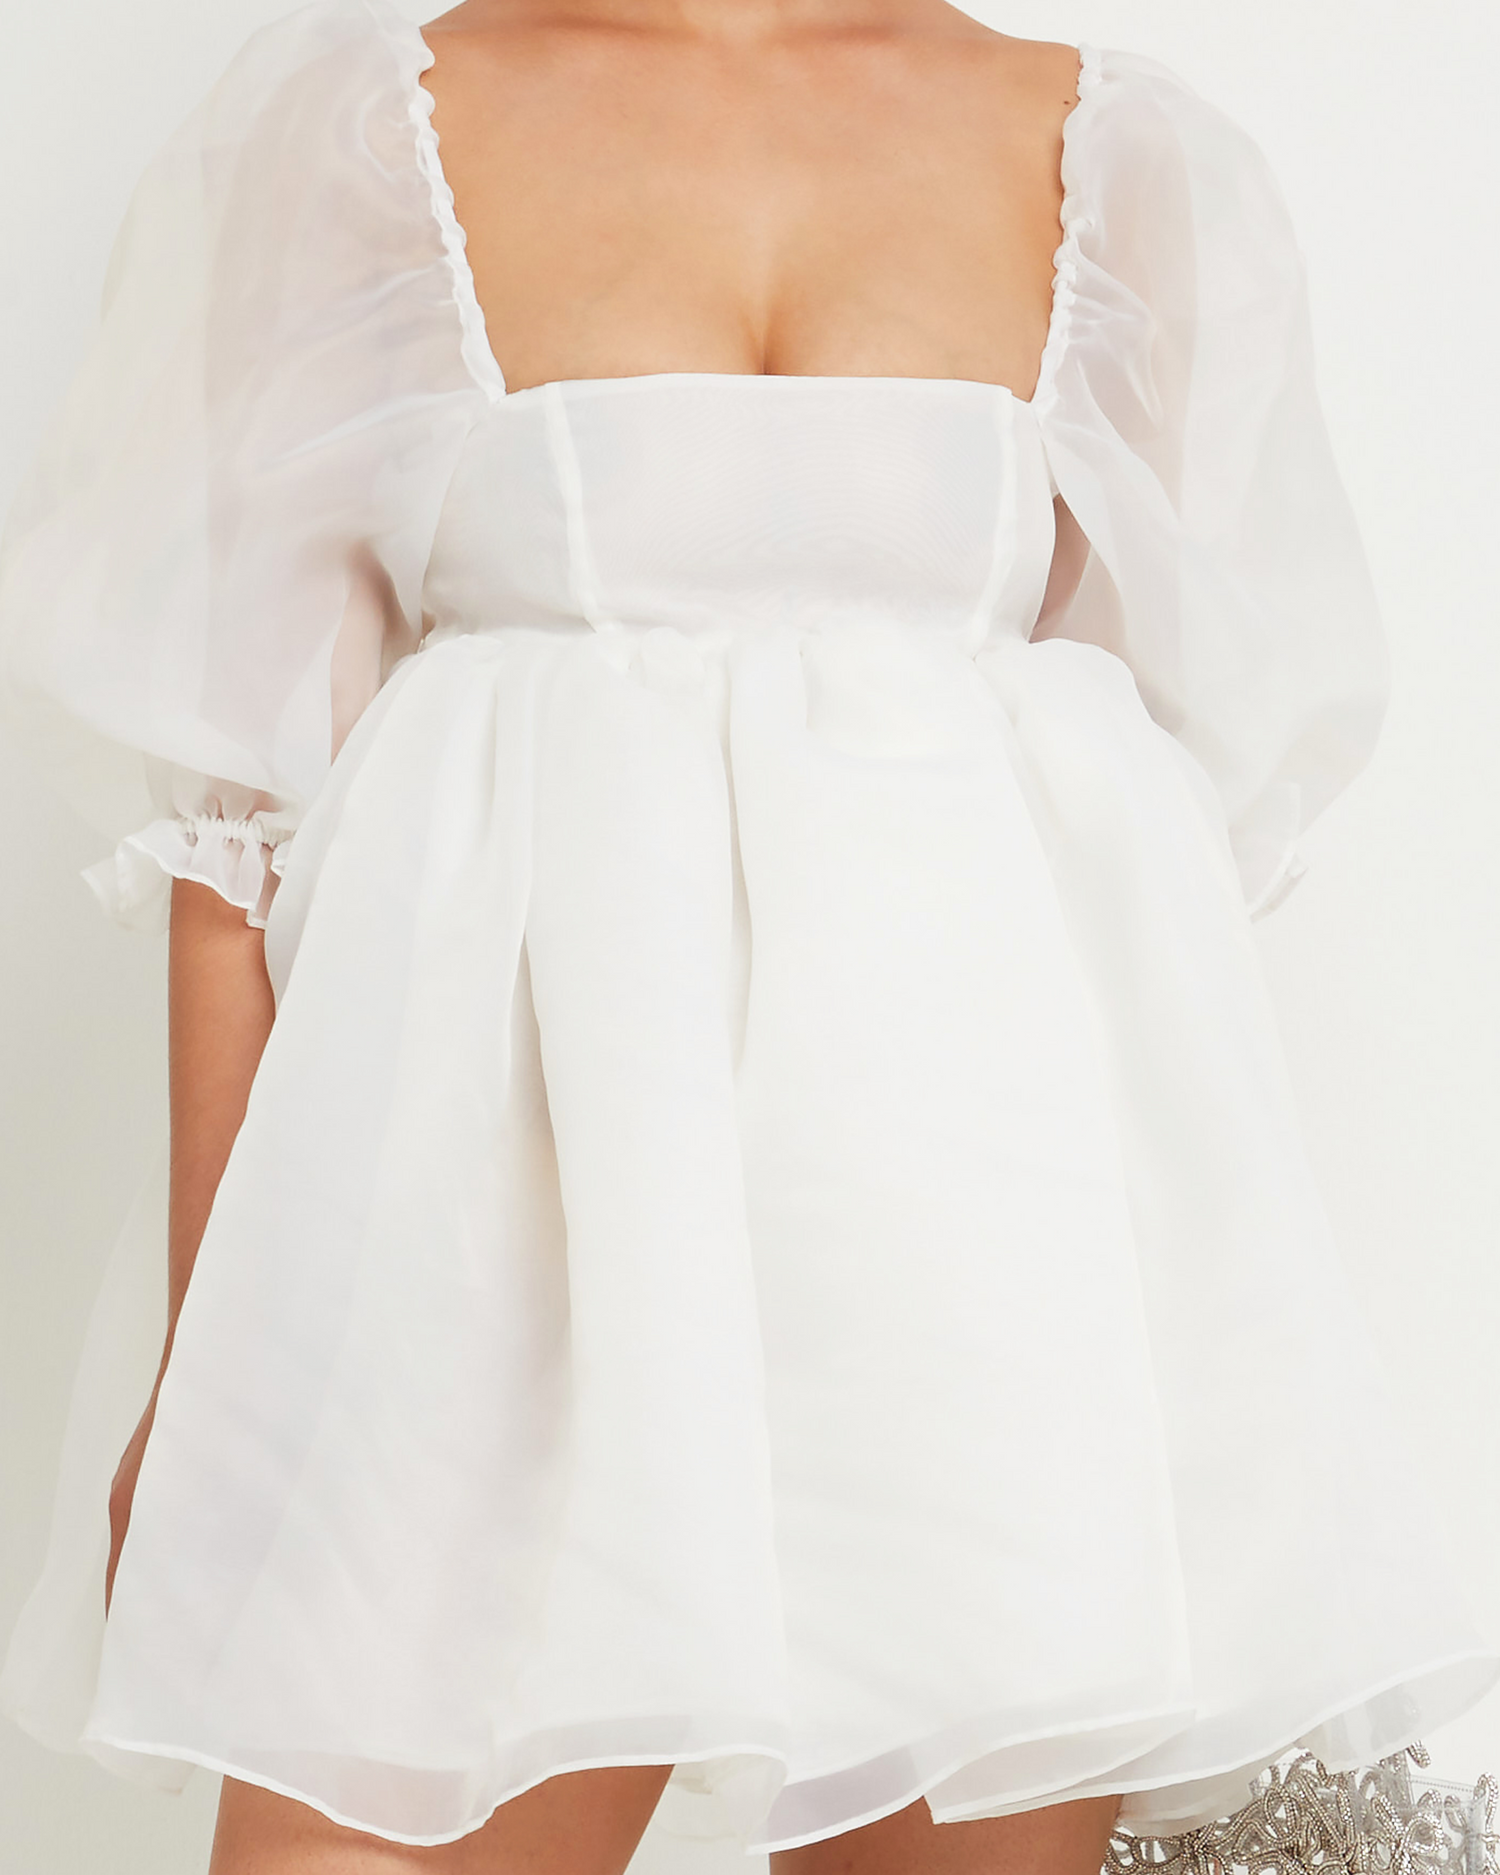 Fifth image of Cloud Mini Dress, a white mini wedding dress with square neckline, sheer puff sleeves, back zipper, babydoll sillhouette, and layered sheer fabric